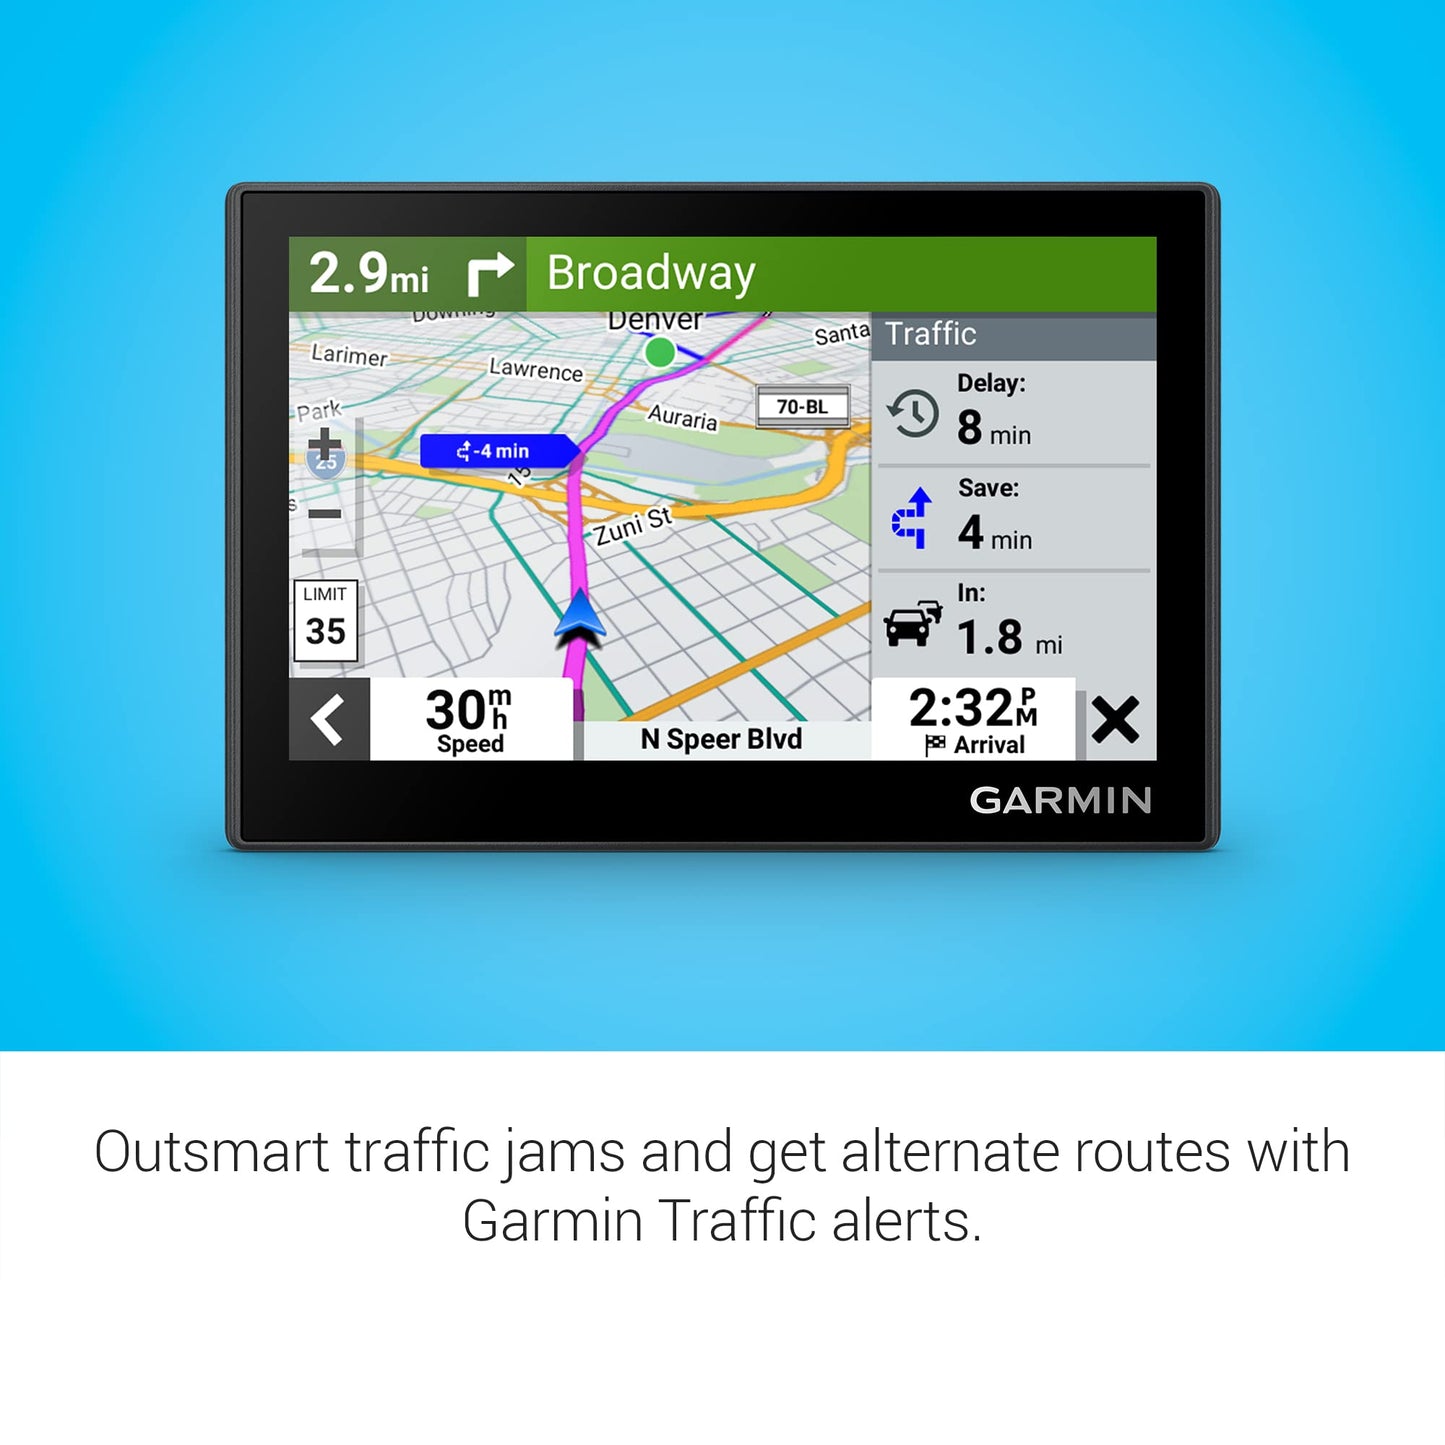 Garmin Drive™ 53 GPS Navigator, High-Resolution Touchscreen, Simple On-Screen Menus and Easy-to-See Maps, Driver Alerts